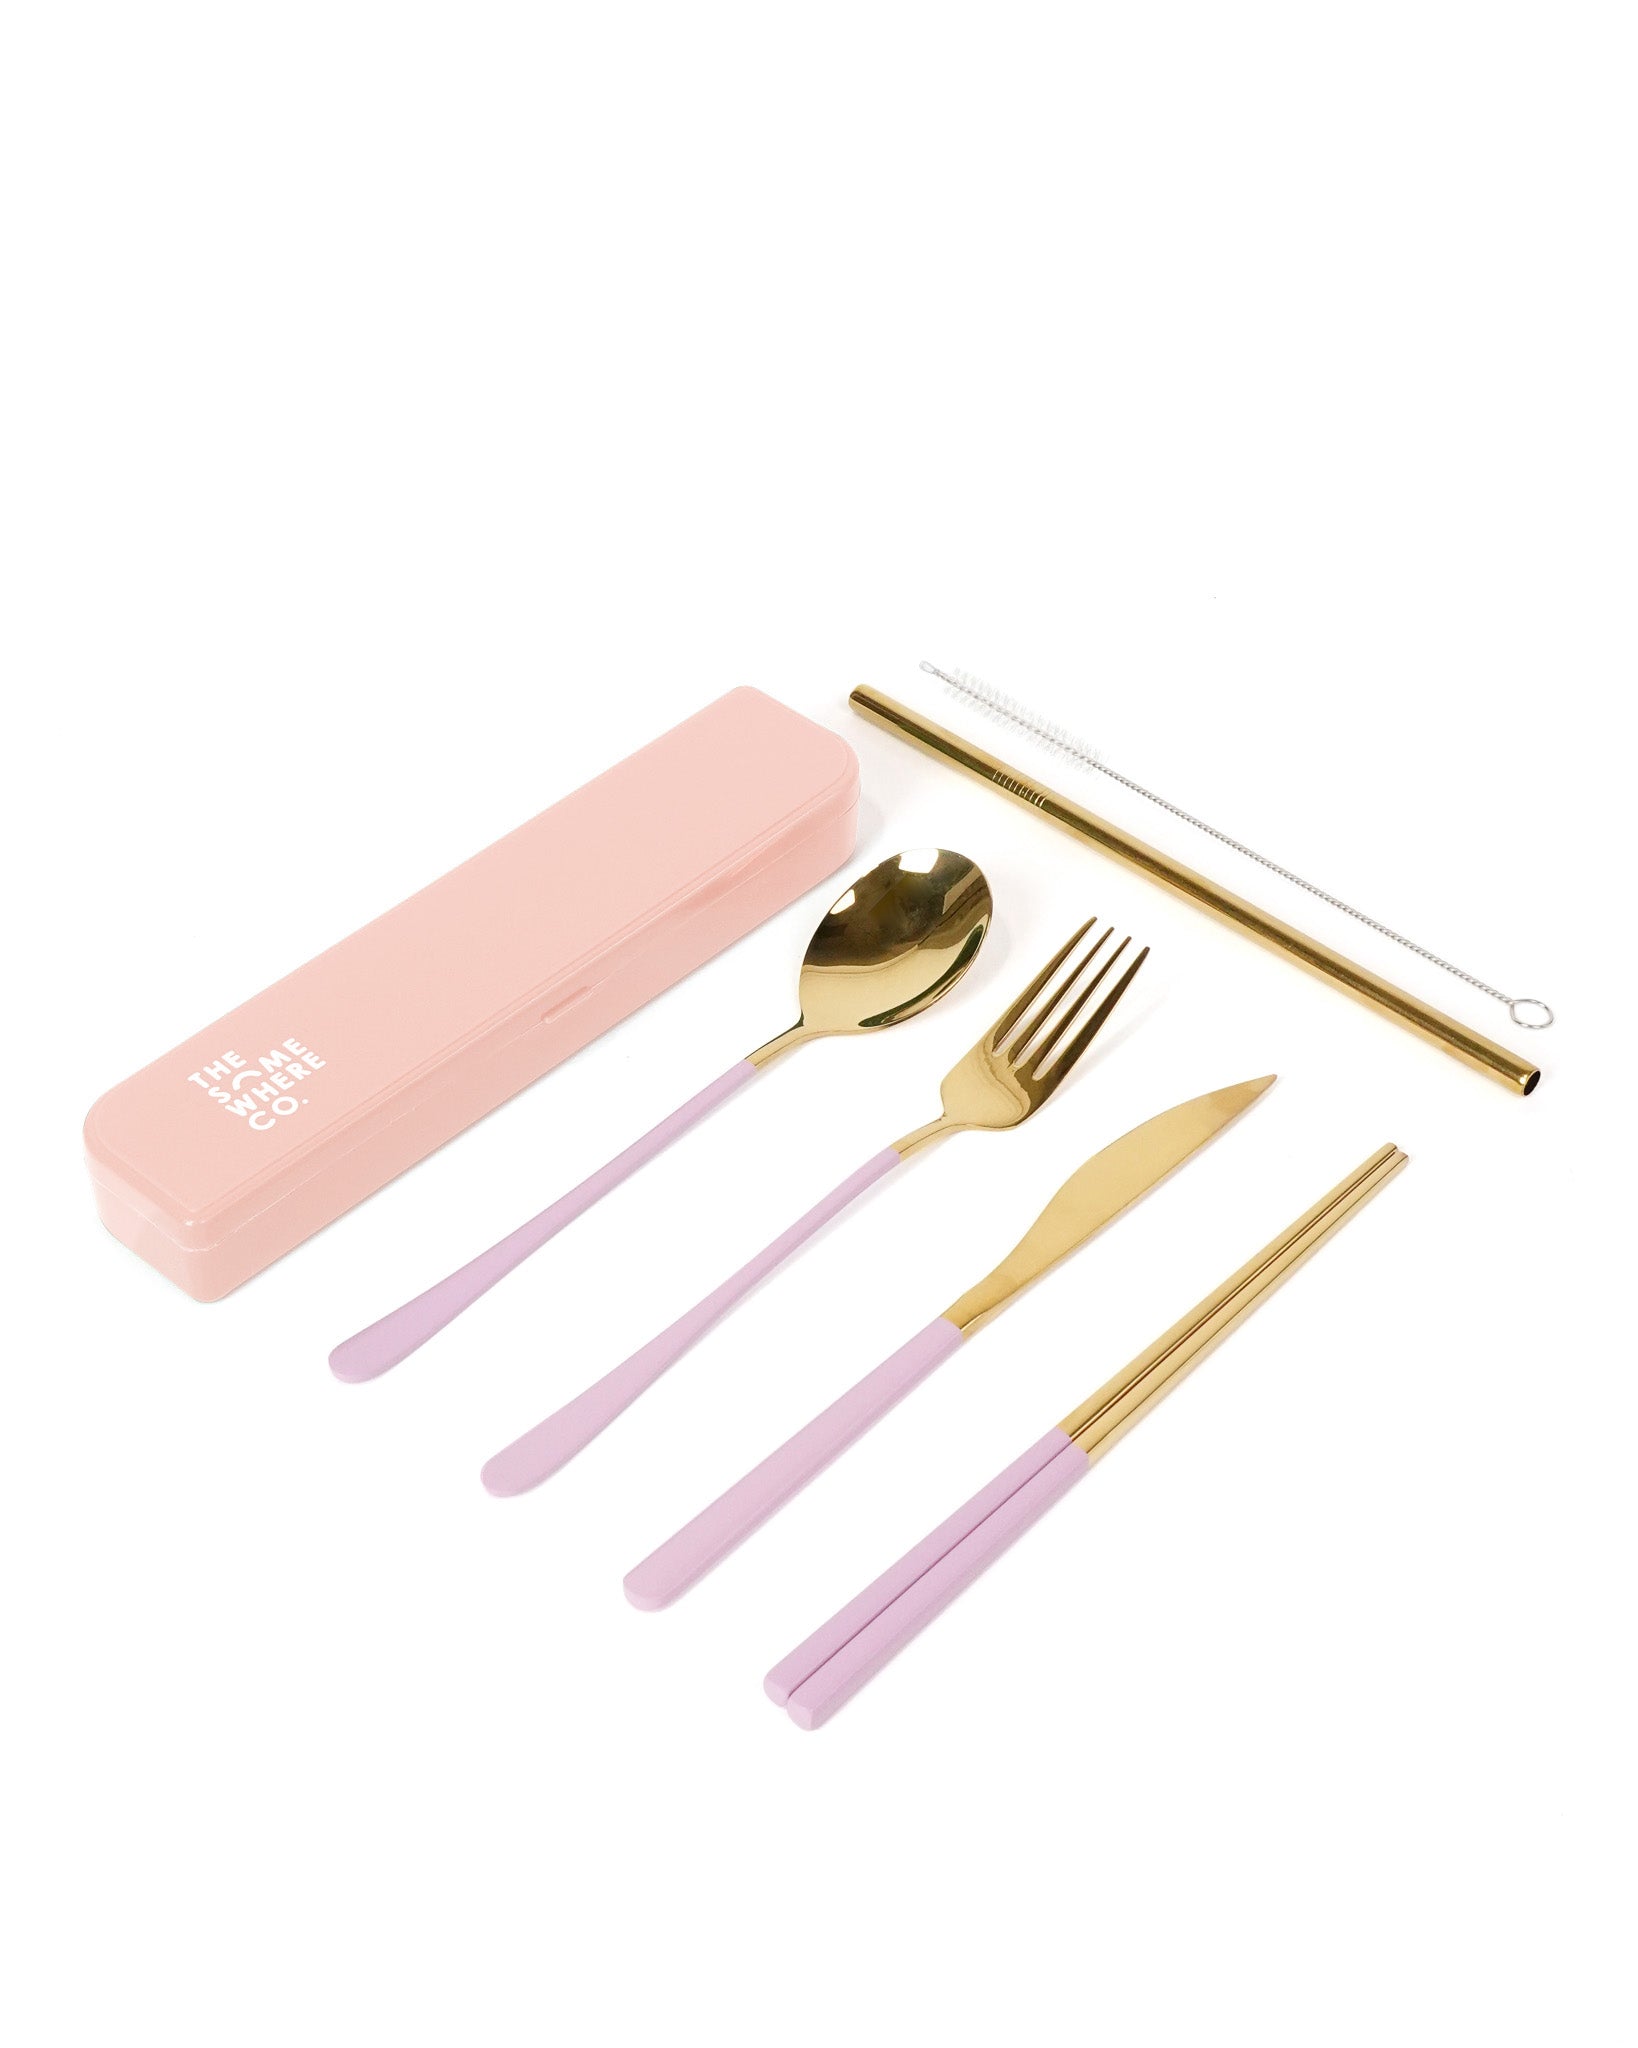 Take Me Away Cutlery Kit - Gold with Lilac Handle